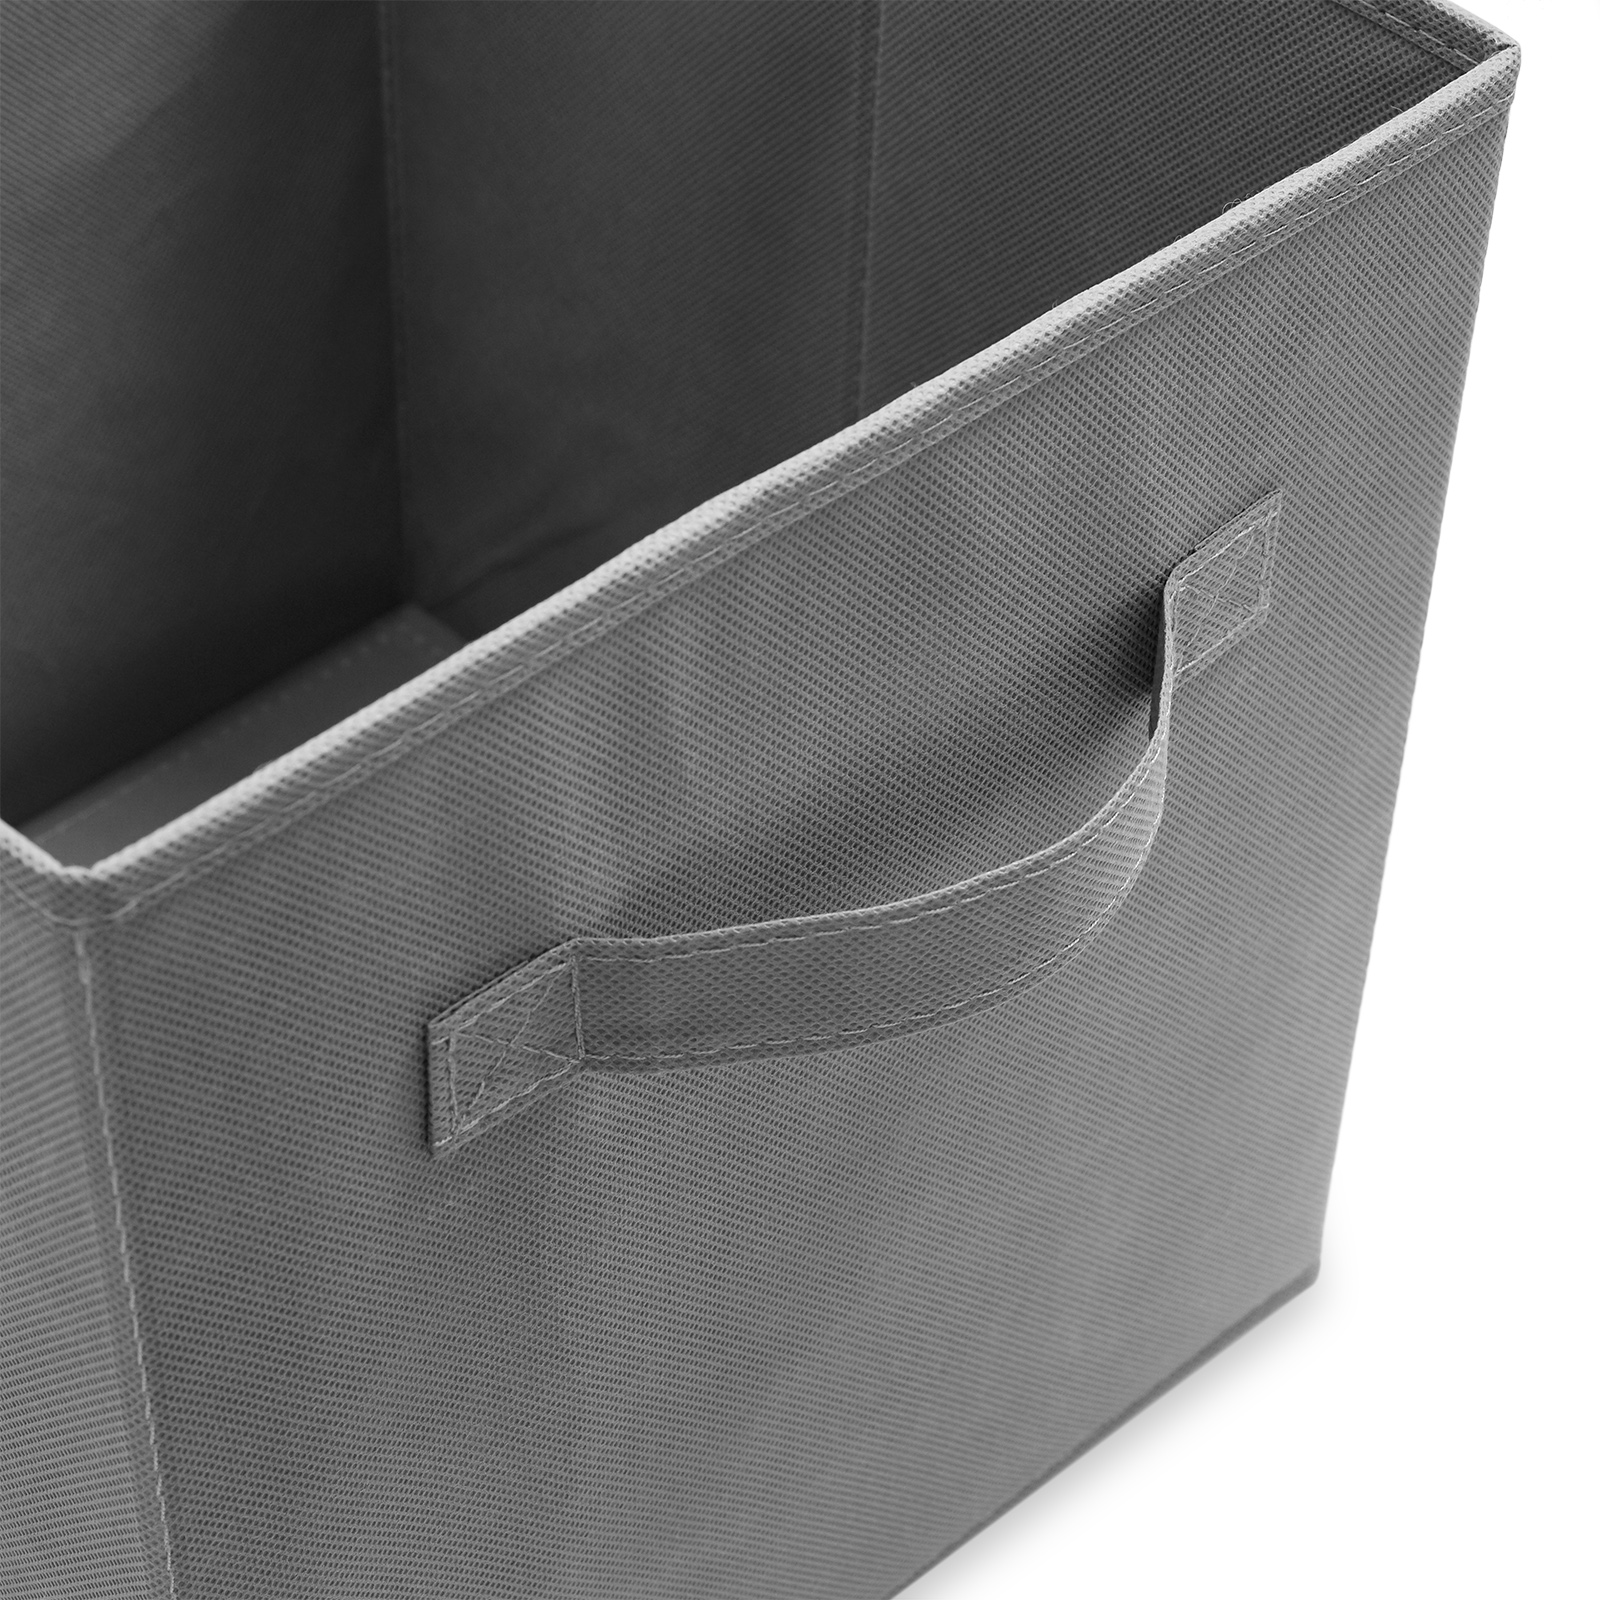 Casafield Set of 6 Collapsible Fabric Cube Storage Bins - 11" Foldable Cloth Baskets for Shelves, Cubby Organizers & More - image 3 of 7